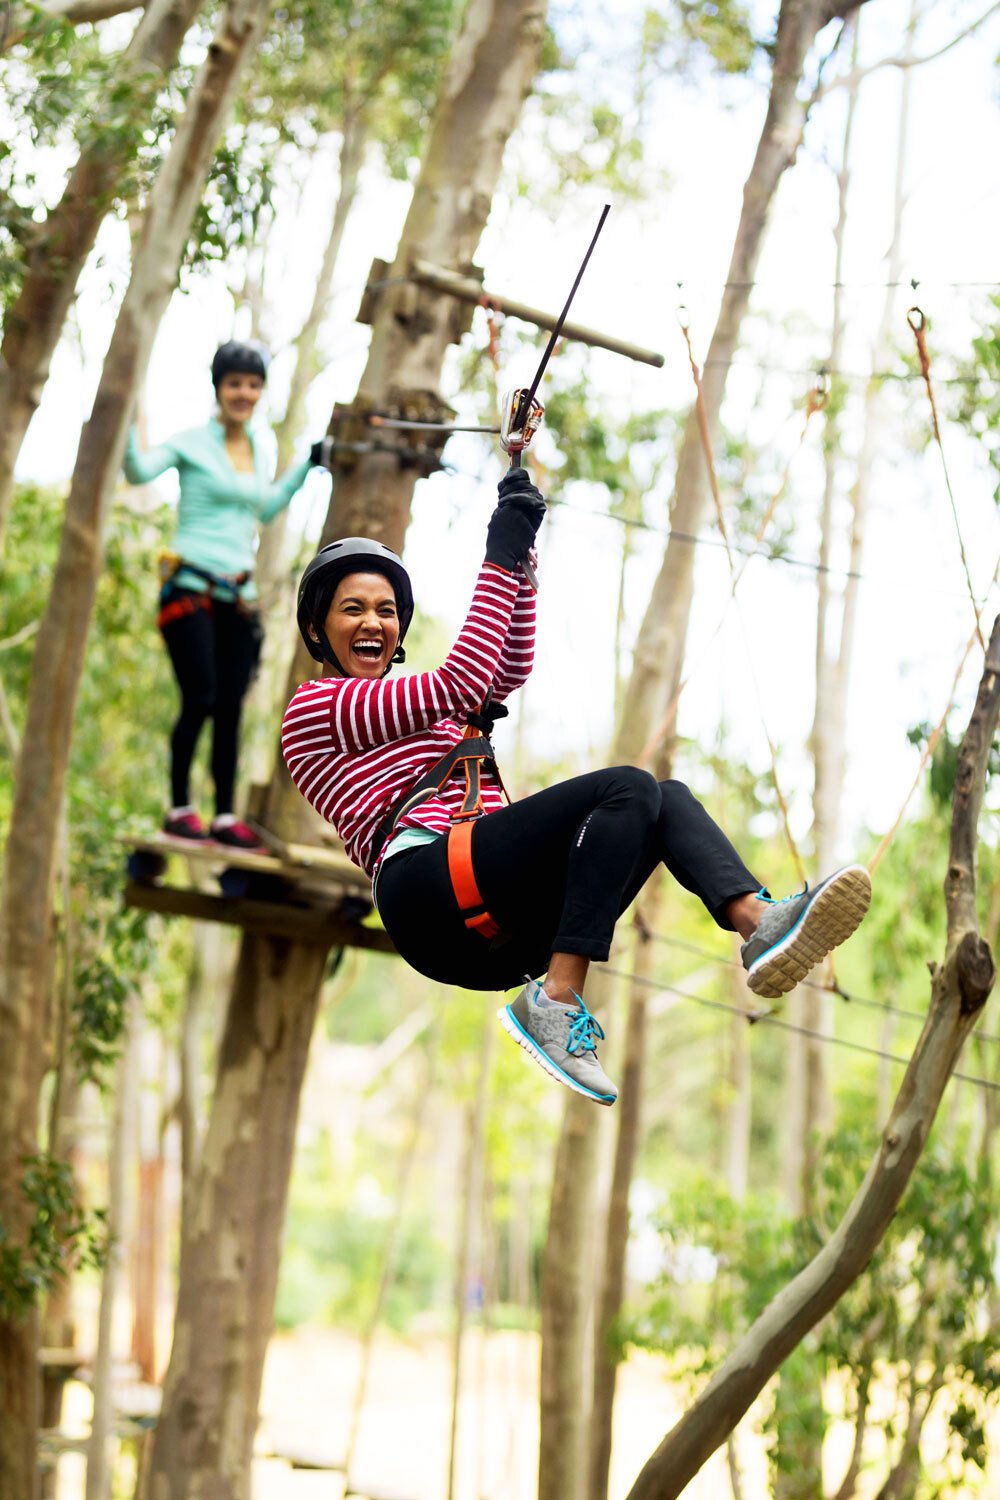 Challenge your friends to a race down our Twin Ziplines at Westport Adventure.